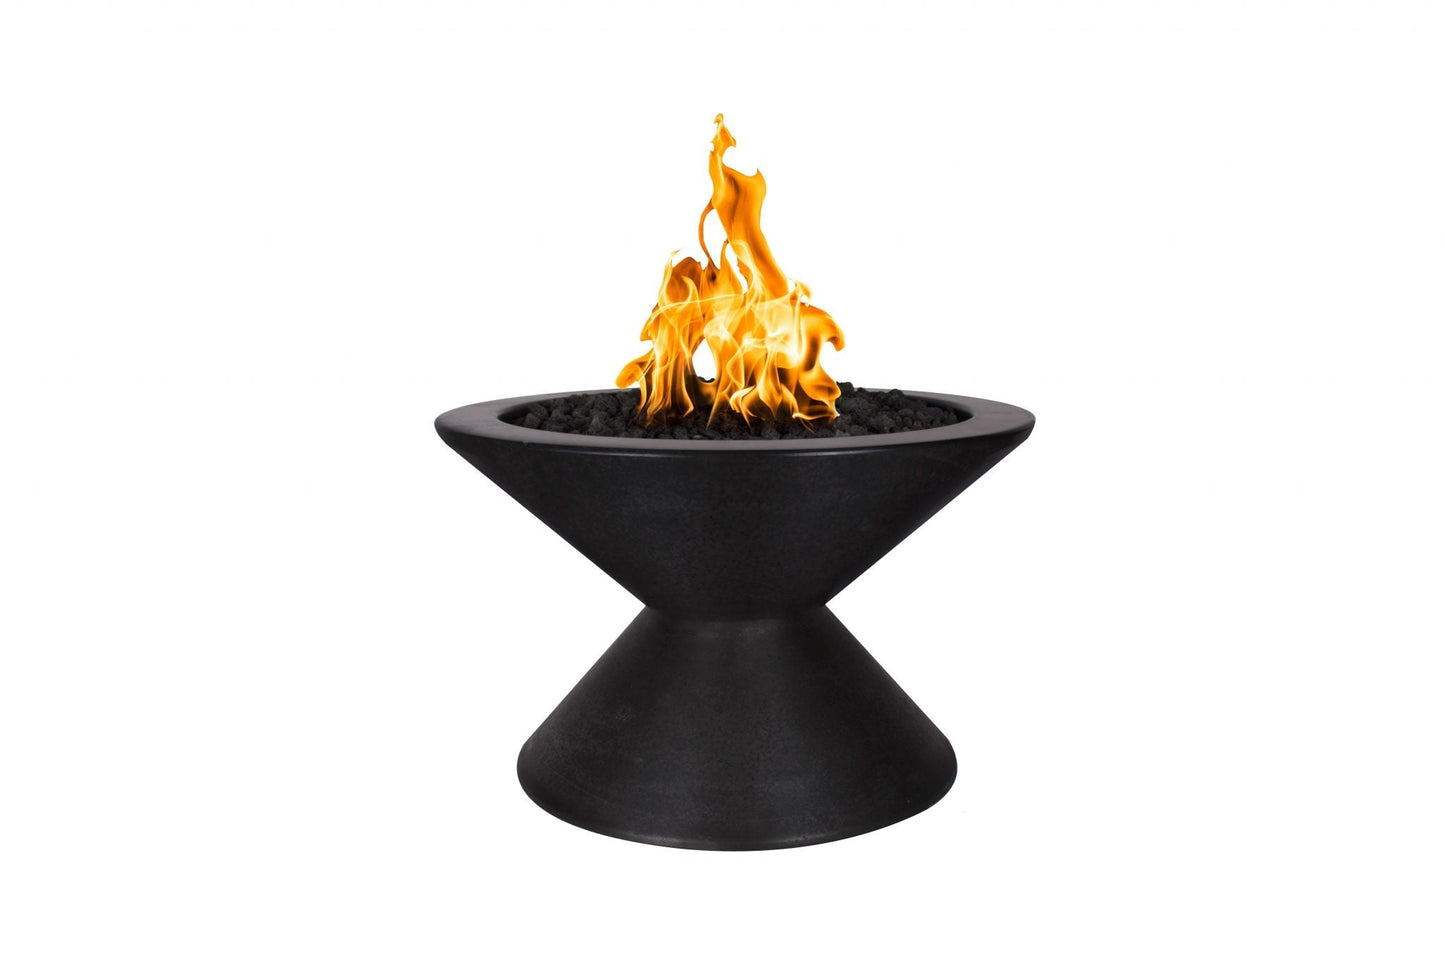 The Outdoor Plus Round Lucia 31" Metallic Pearl GFRC Concrete Liquid Propane Fire Pit with 12V Electronic Ignition